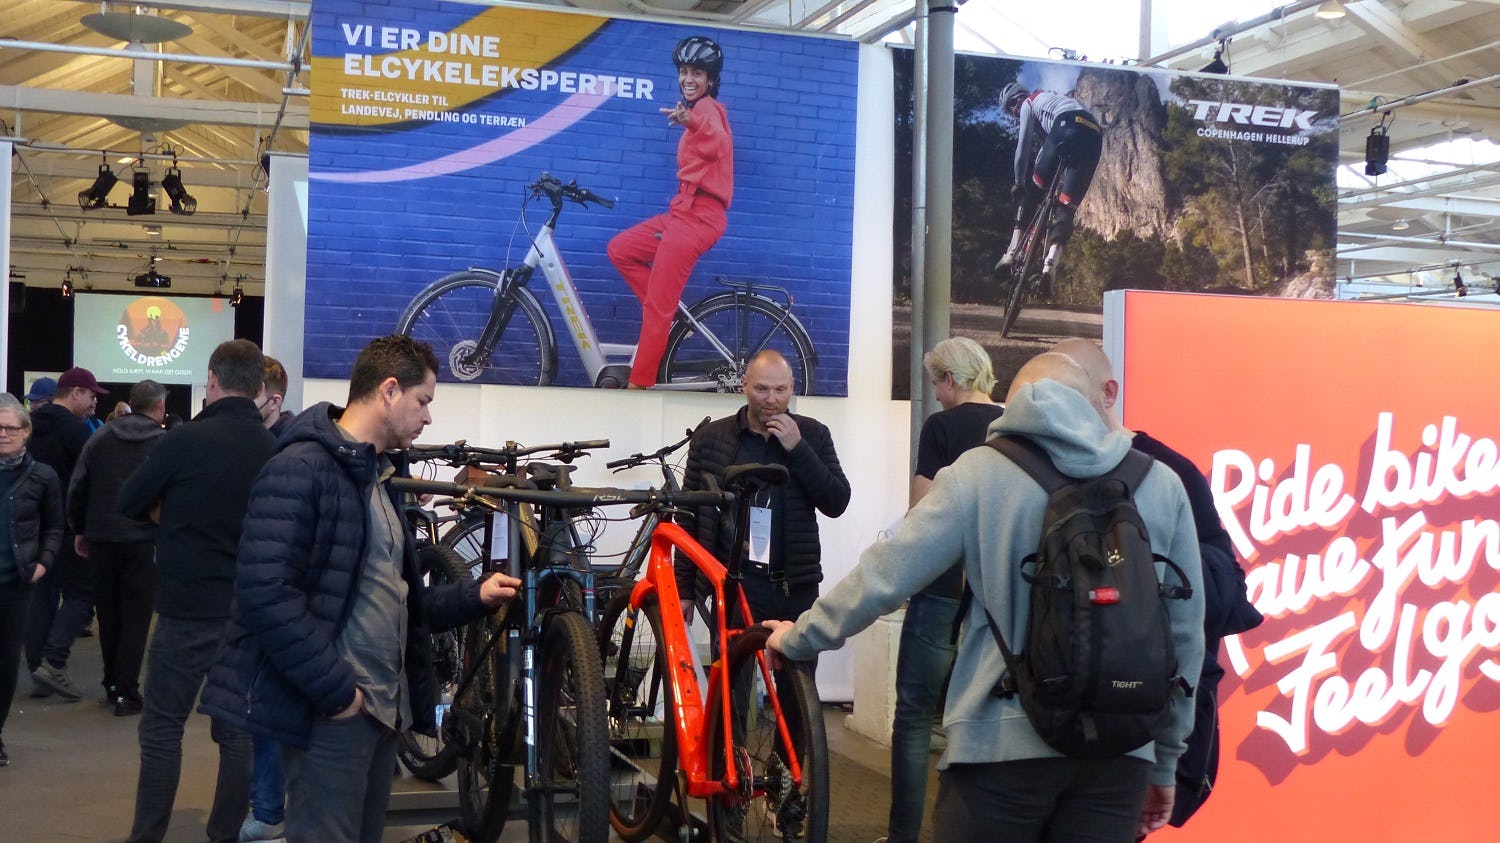 Building on the success of previous editions, Copenhagen Bike Show has developed a new strategy to increase the B2B engagement. – Photo Bike Europe